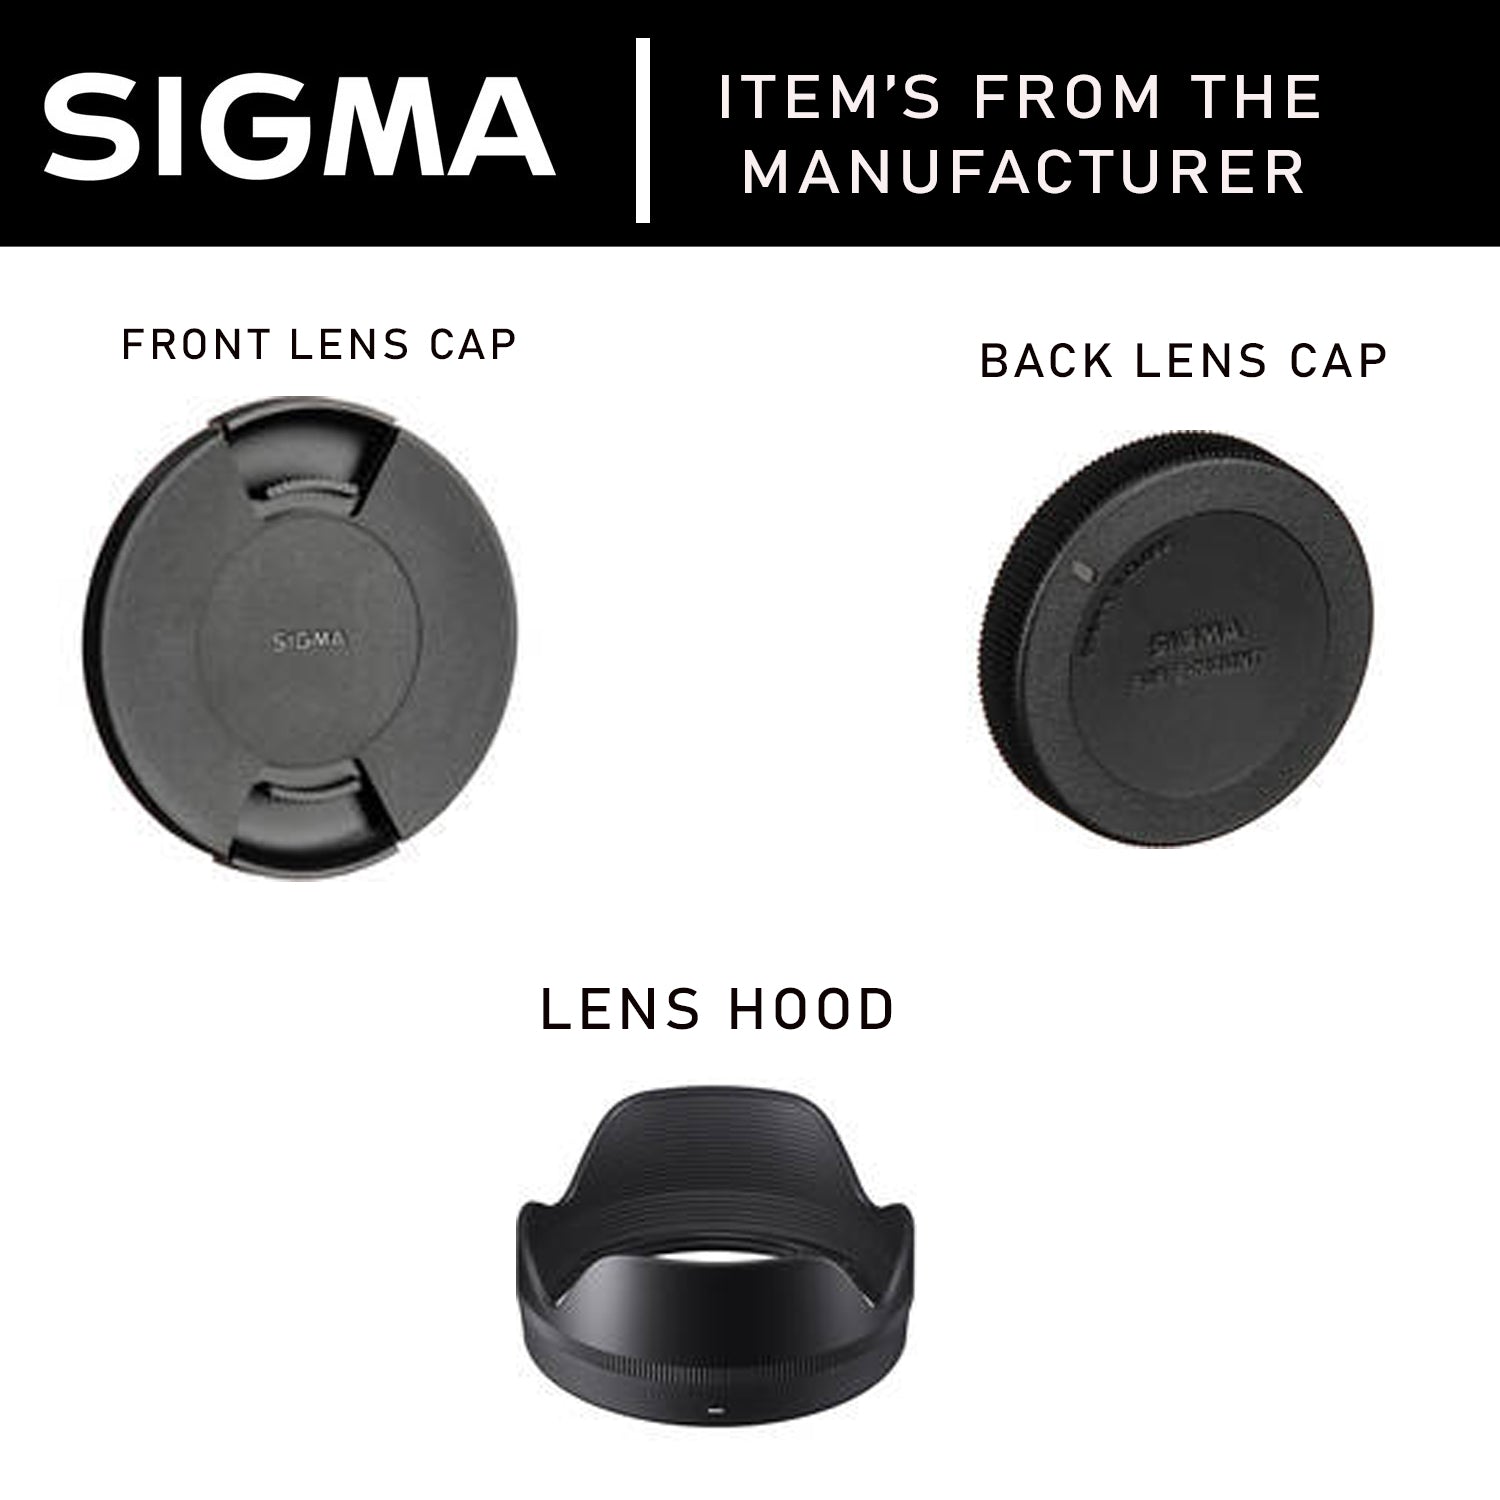 Sigma 16mm f/1.4 DC DN Contemporary Lens for Sony E With Accessories